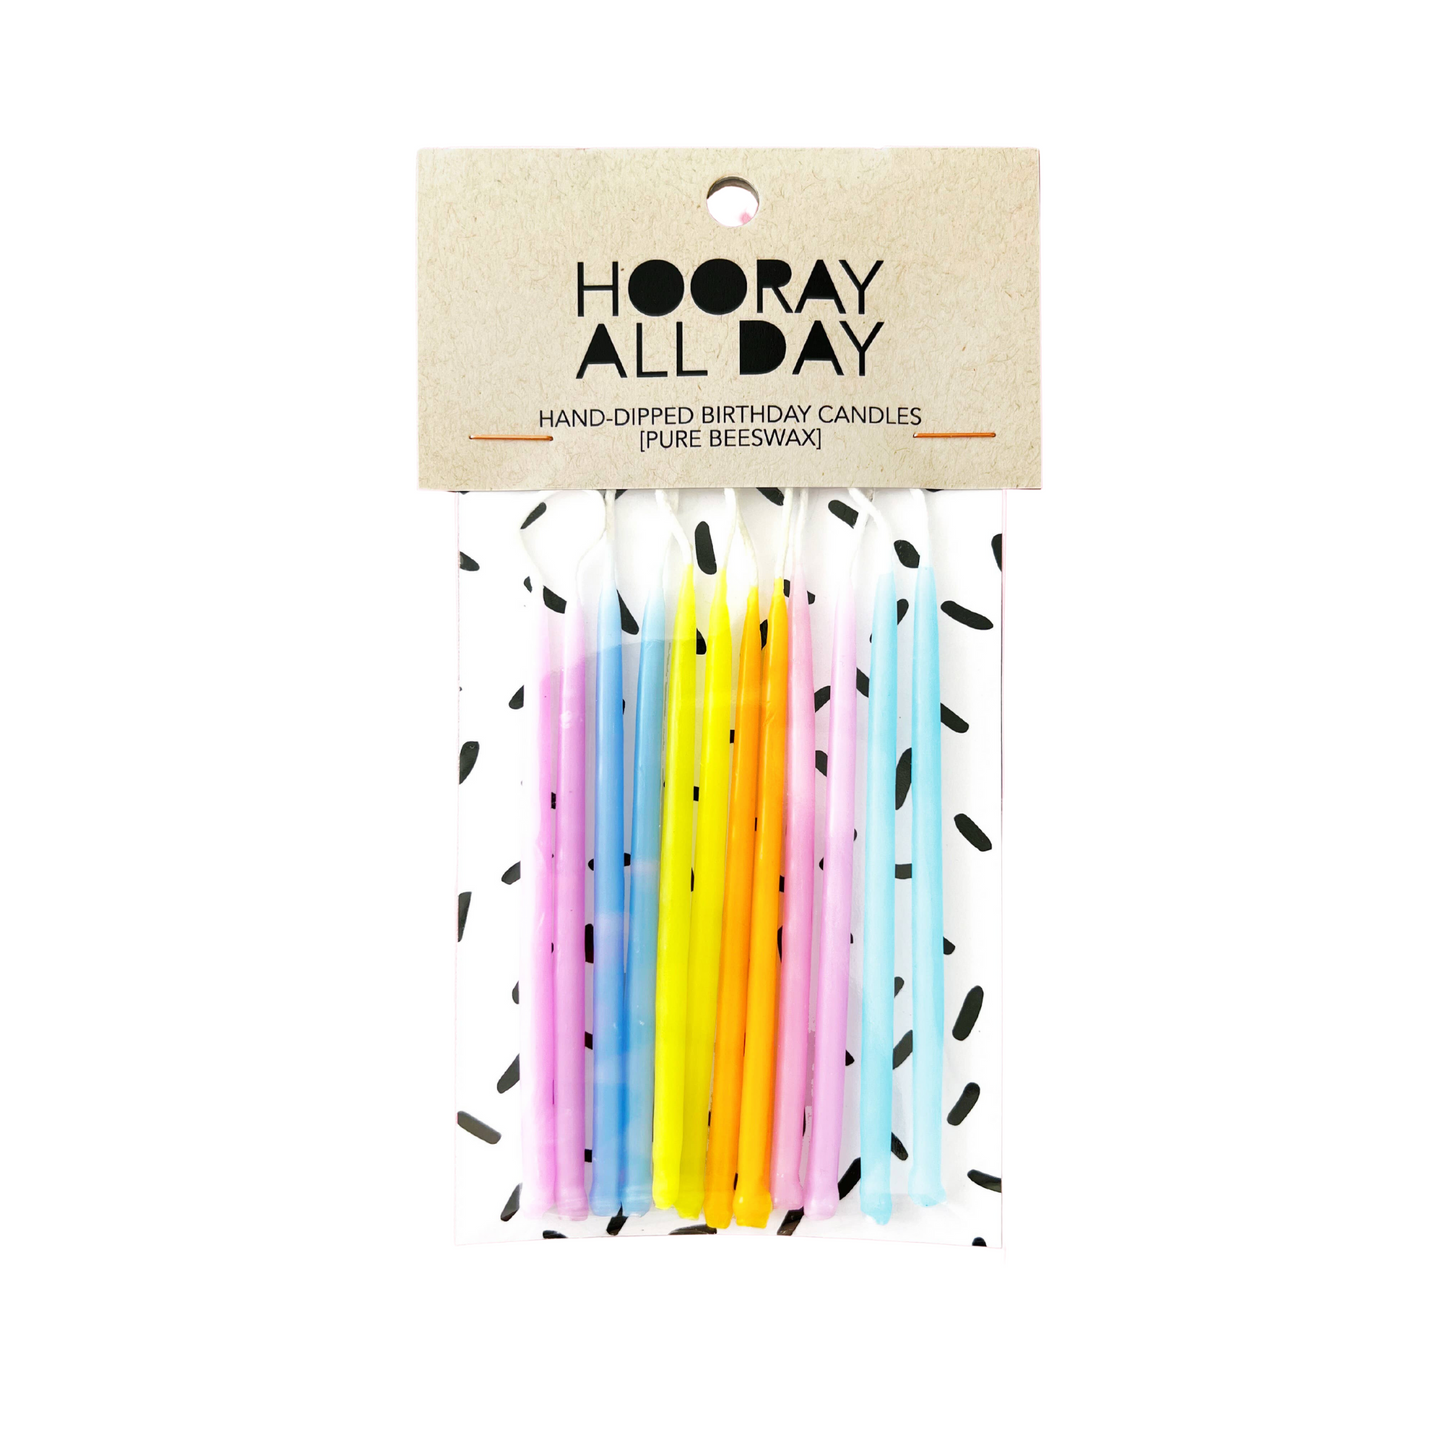 PASTEL HAND-DIPPED BIRTHDAY CANDLES